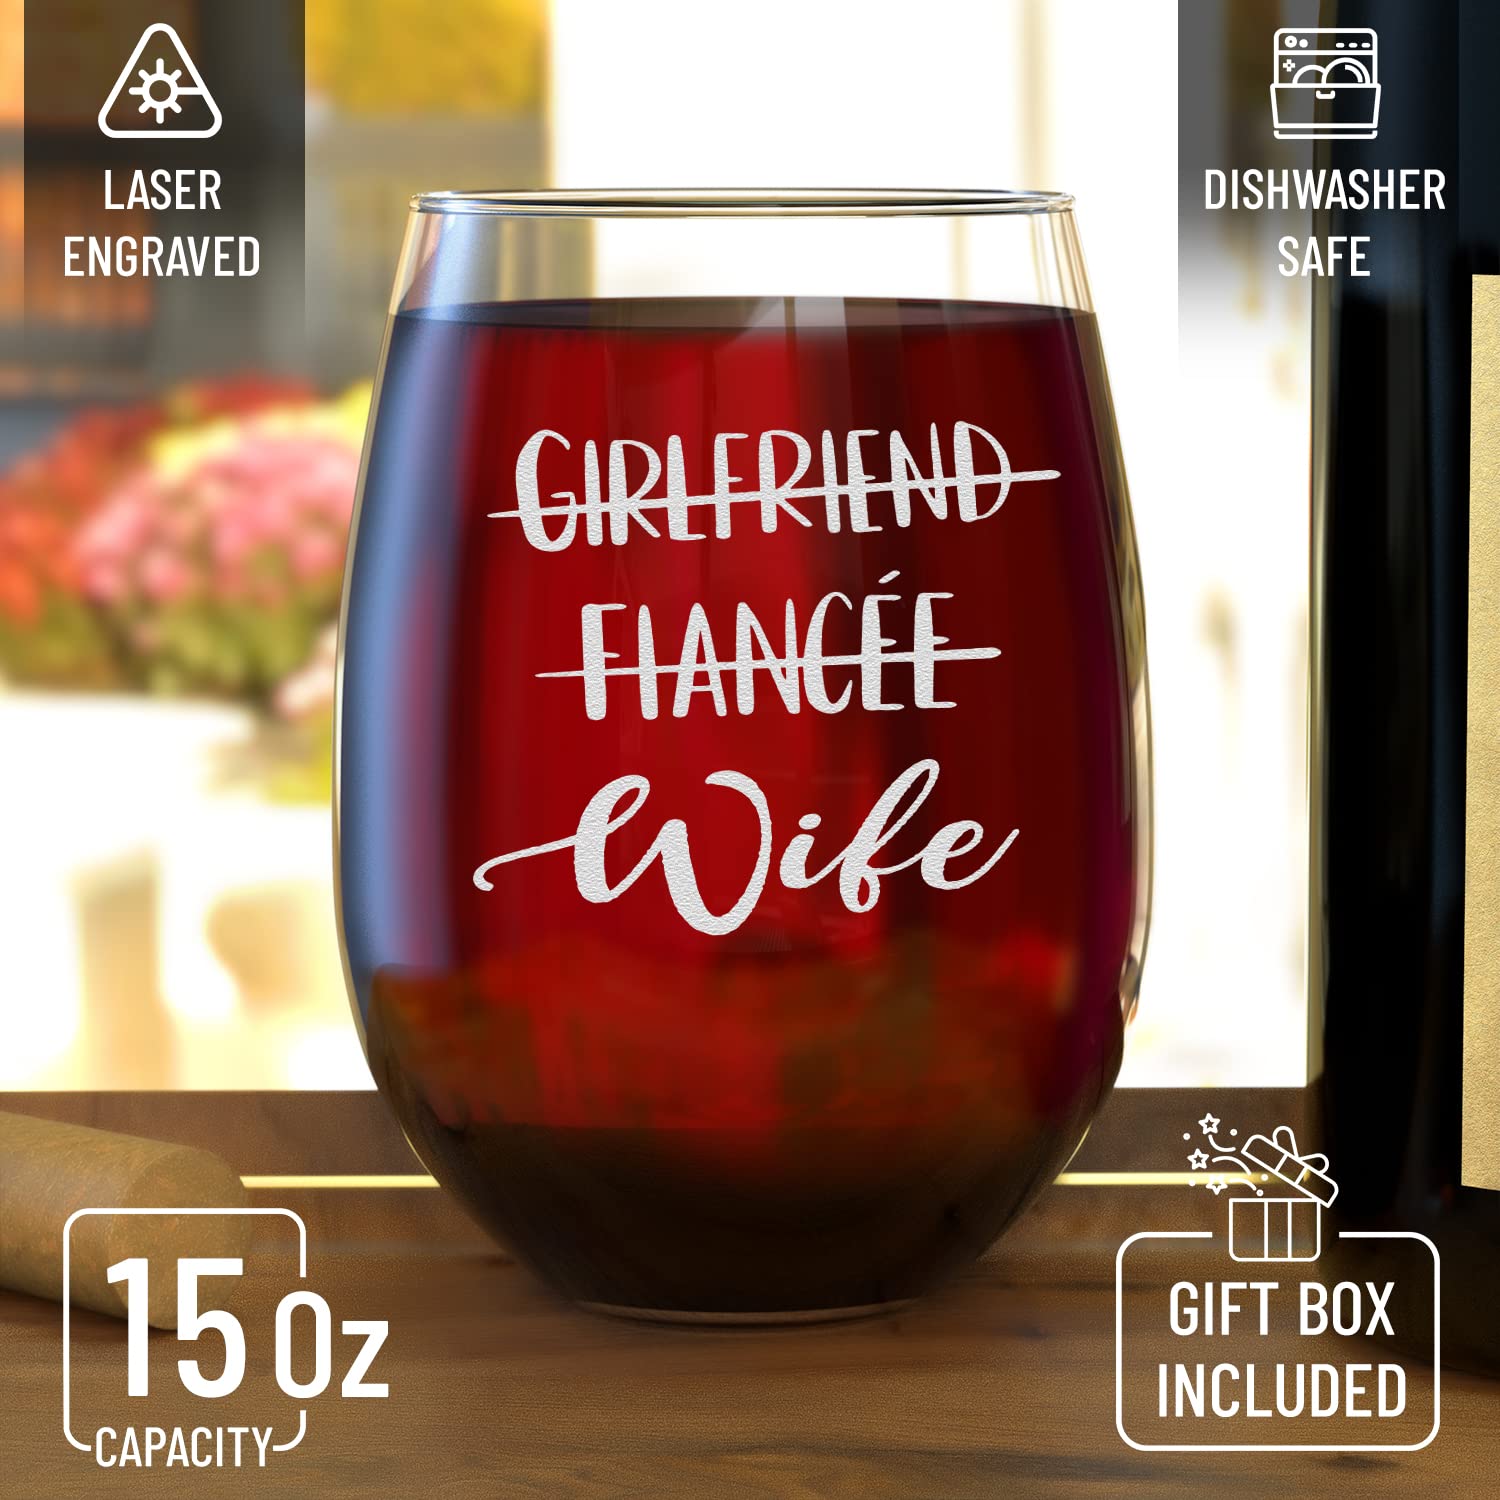 shop4ever® Boyfriend Fiance Husband Girlfriend Fiancee Wife Couples Gift Set Engraved Whiskey Glass and Stemless Wine Glass for Him for Her